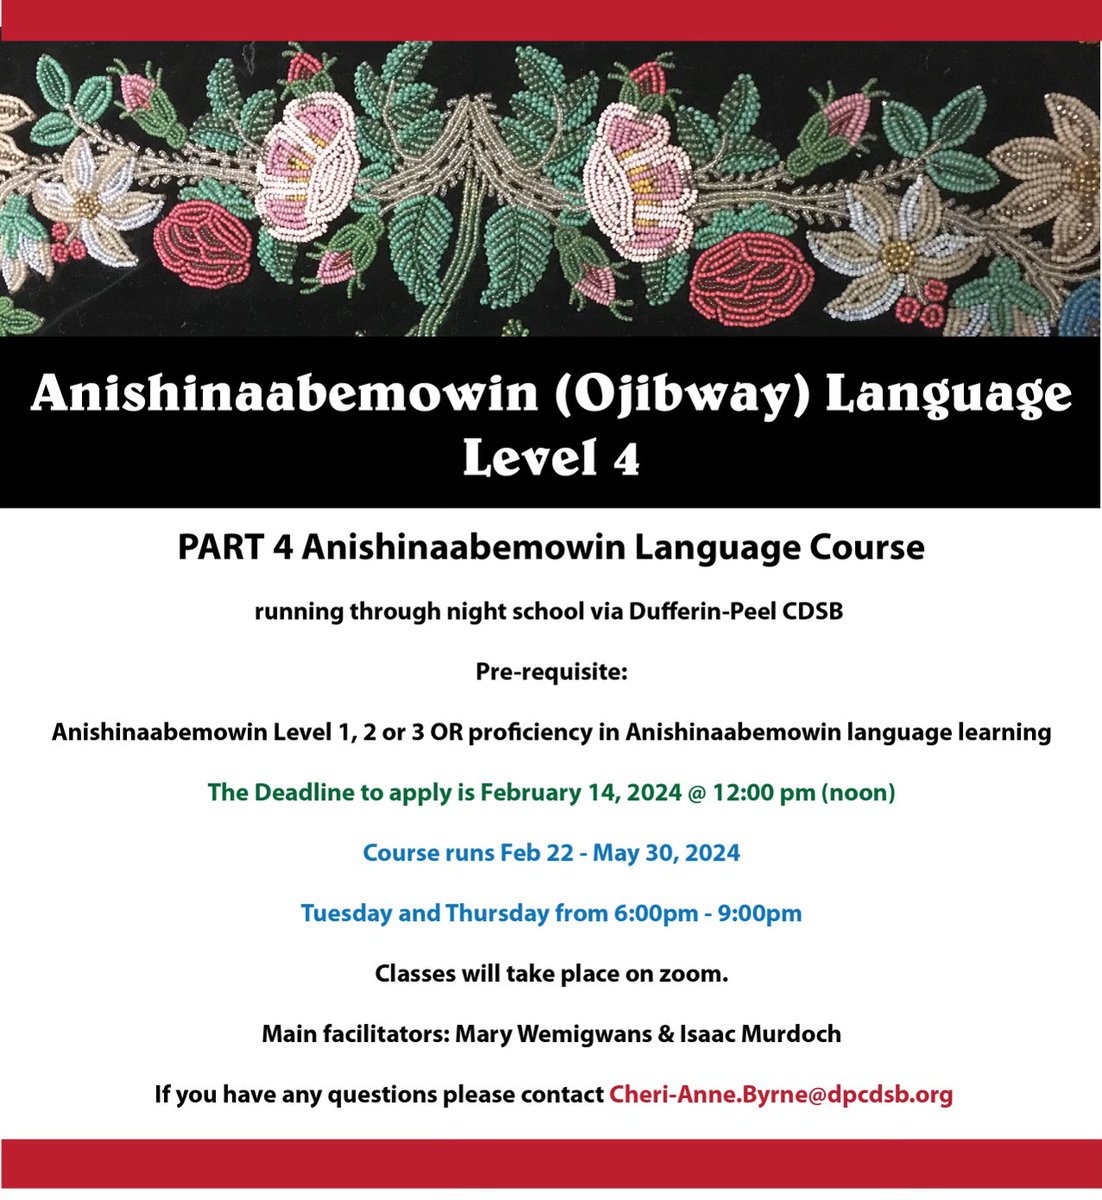 Highschool kids in Ontario, you will get a credit for this! Come join us as we learn Anishinaabemowin. Register and you will have fun! We are teaching beginners Level 4. Open to any secondary student in Ontario! To register please email cherianne.byrne@dpcdsb.org